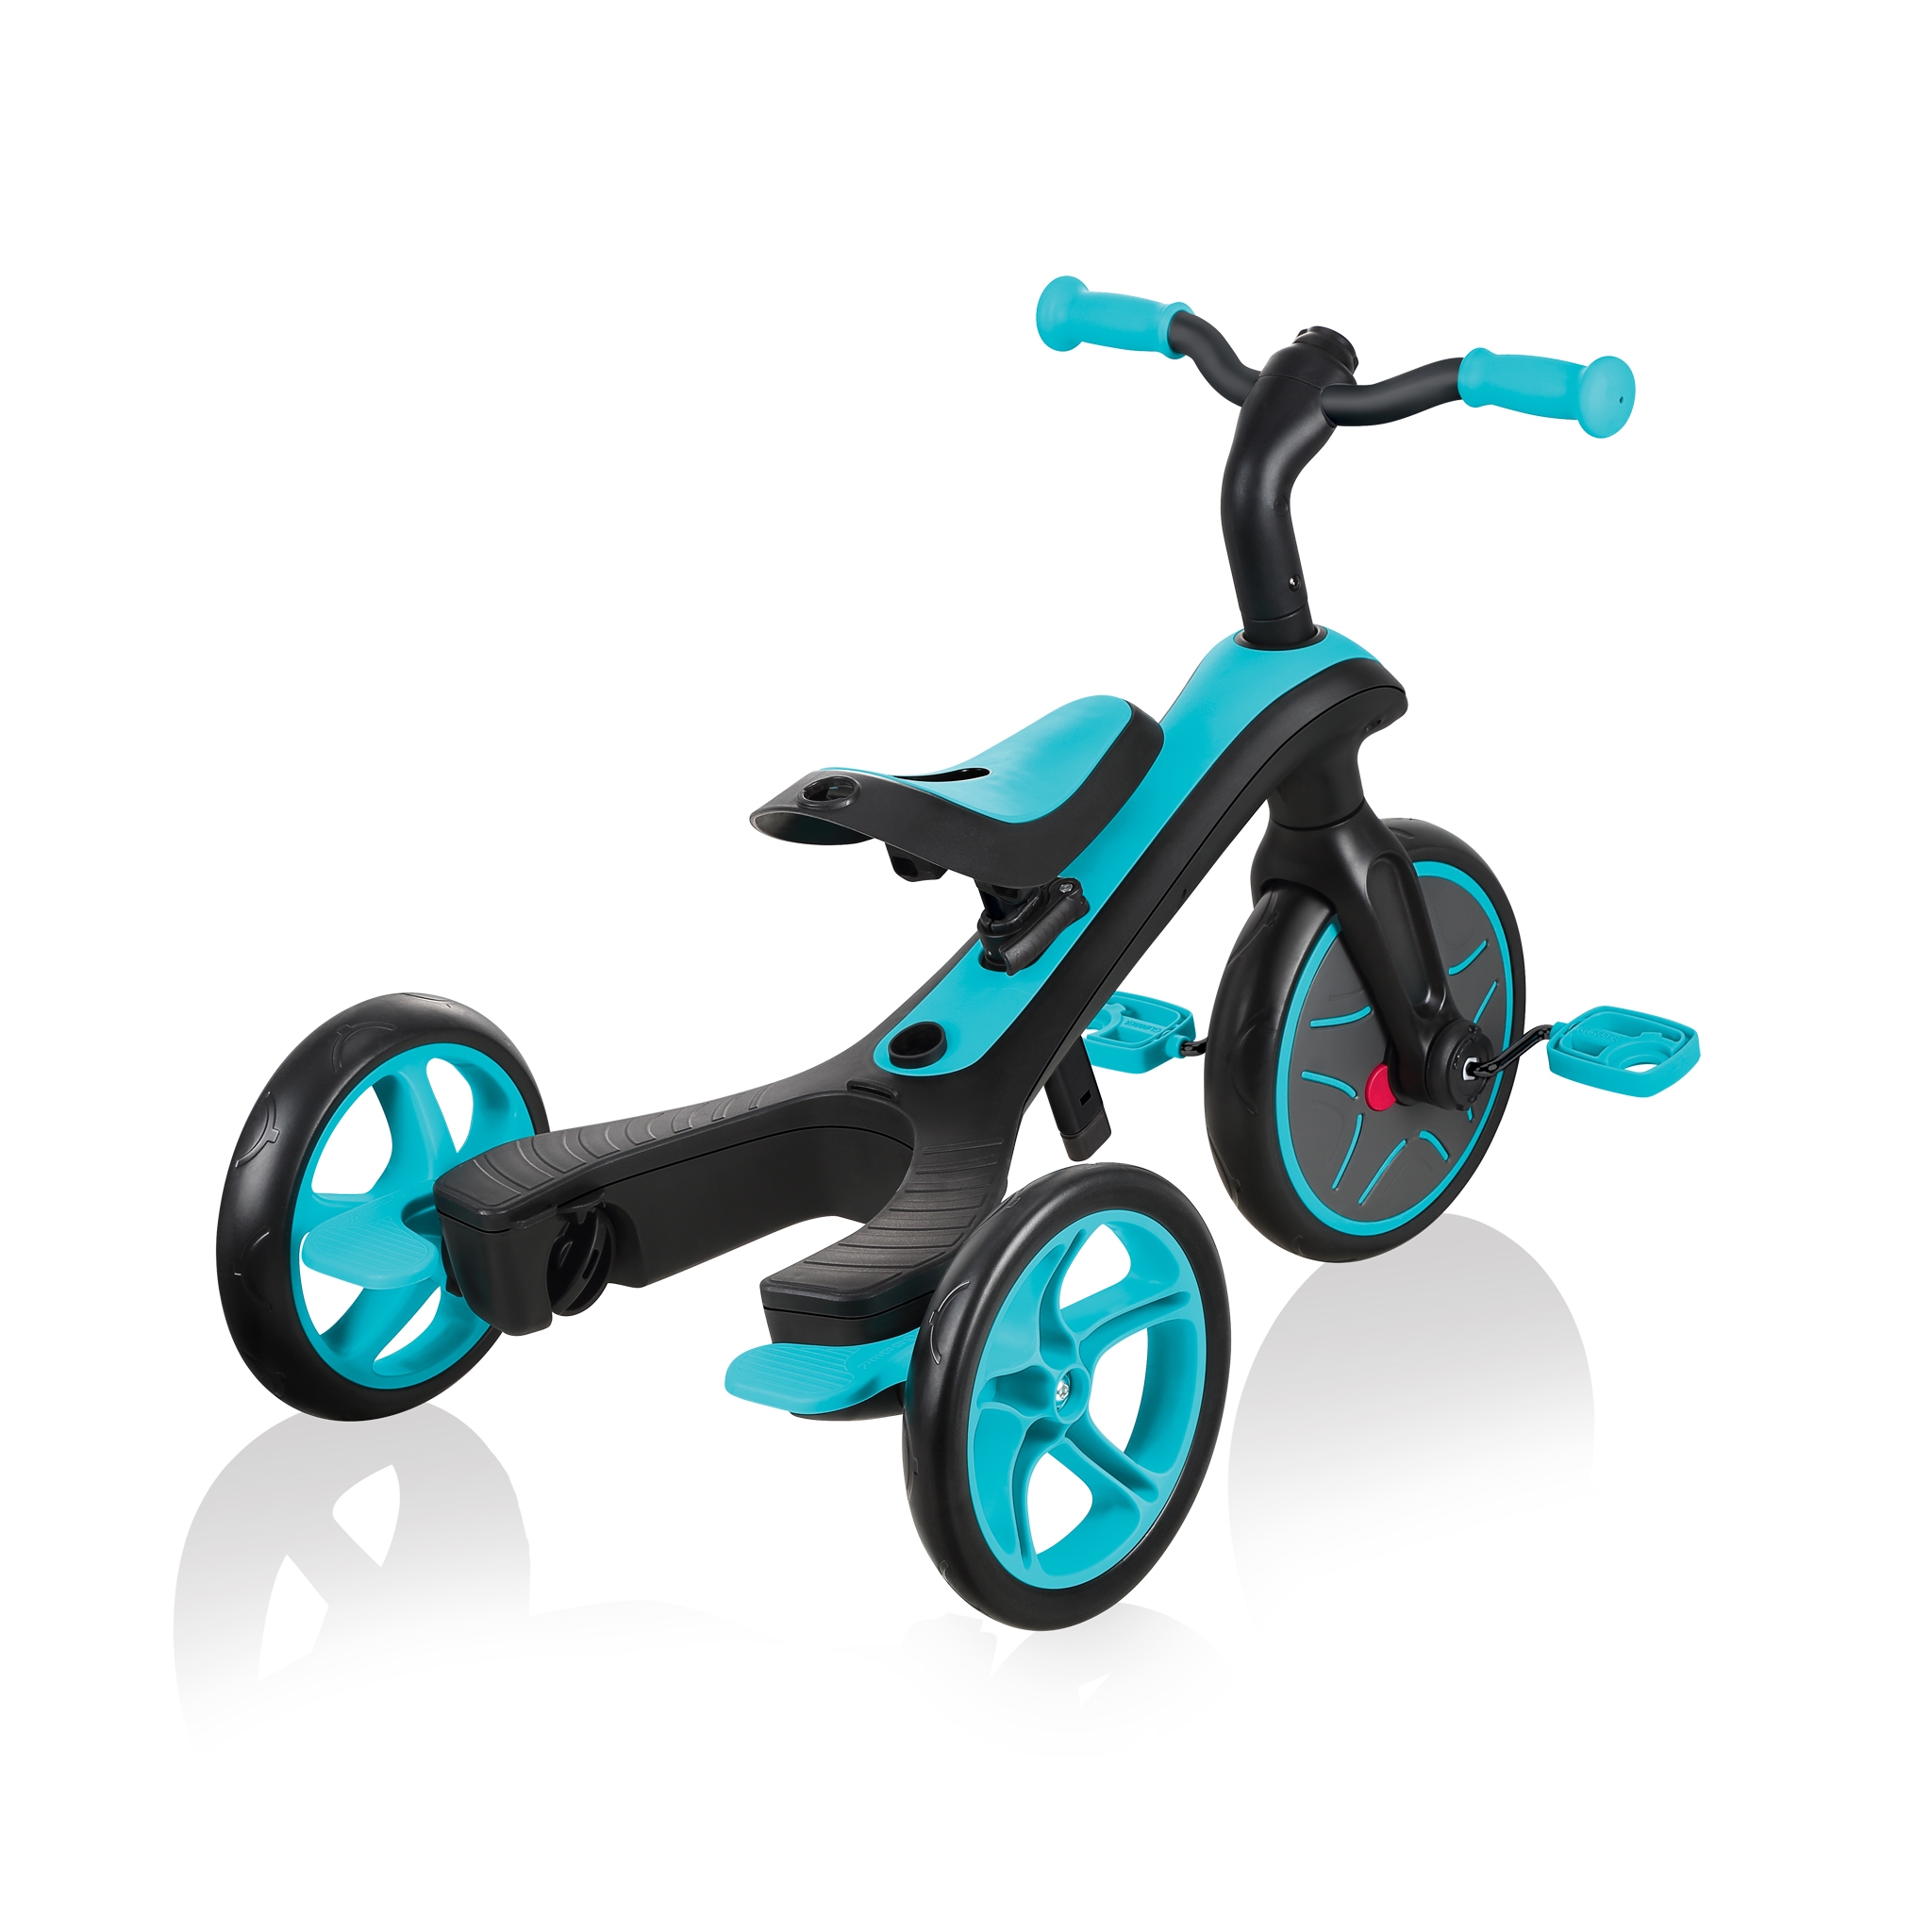 Globber-EXPLORER-TRIKE-3in1-all-in-one-baby-tricycle-and-kids-balance-bike-stage-2-training-trike 5